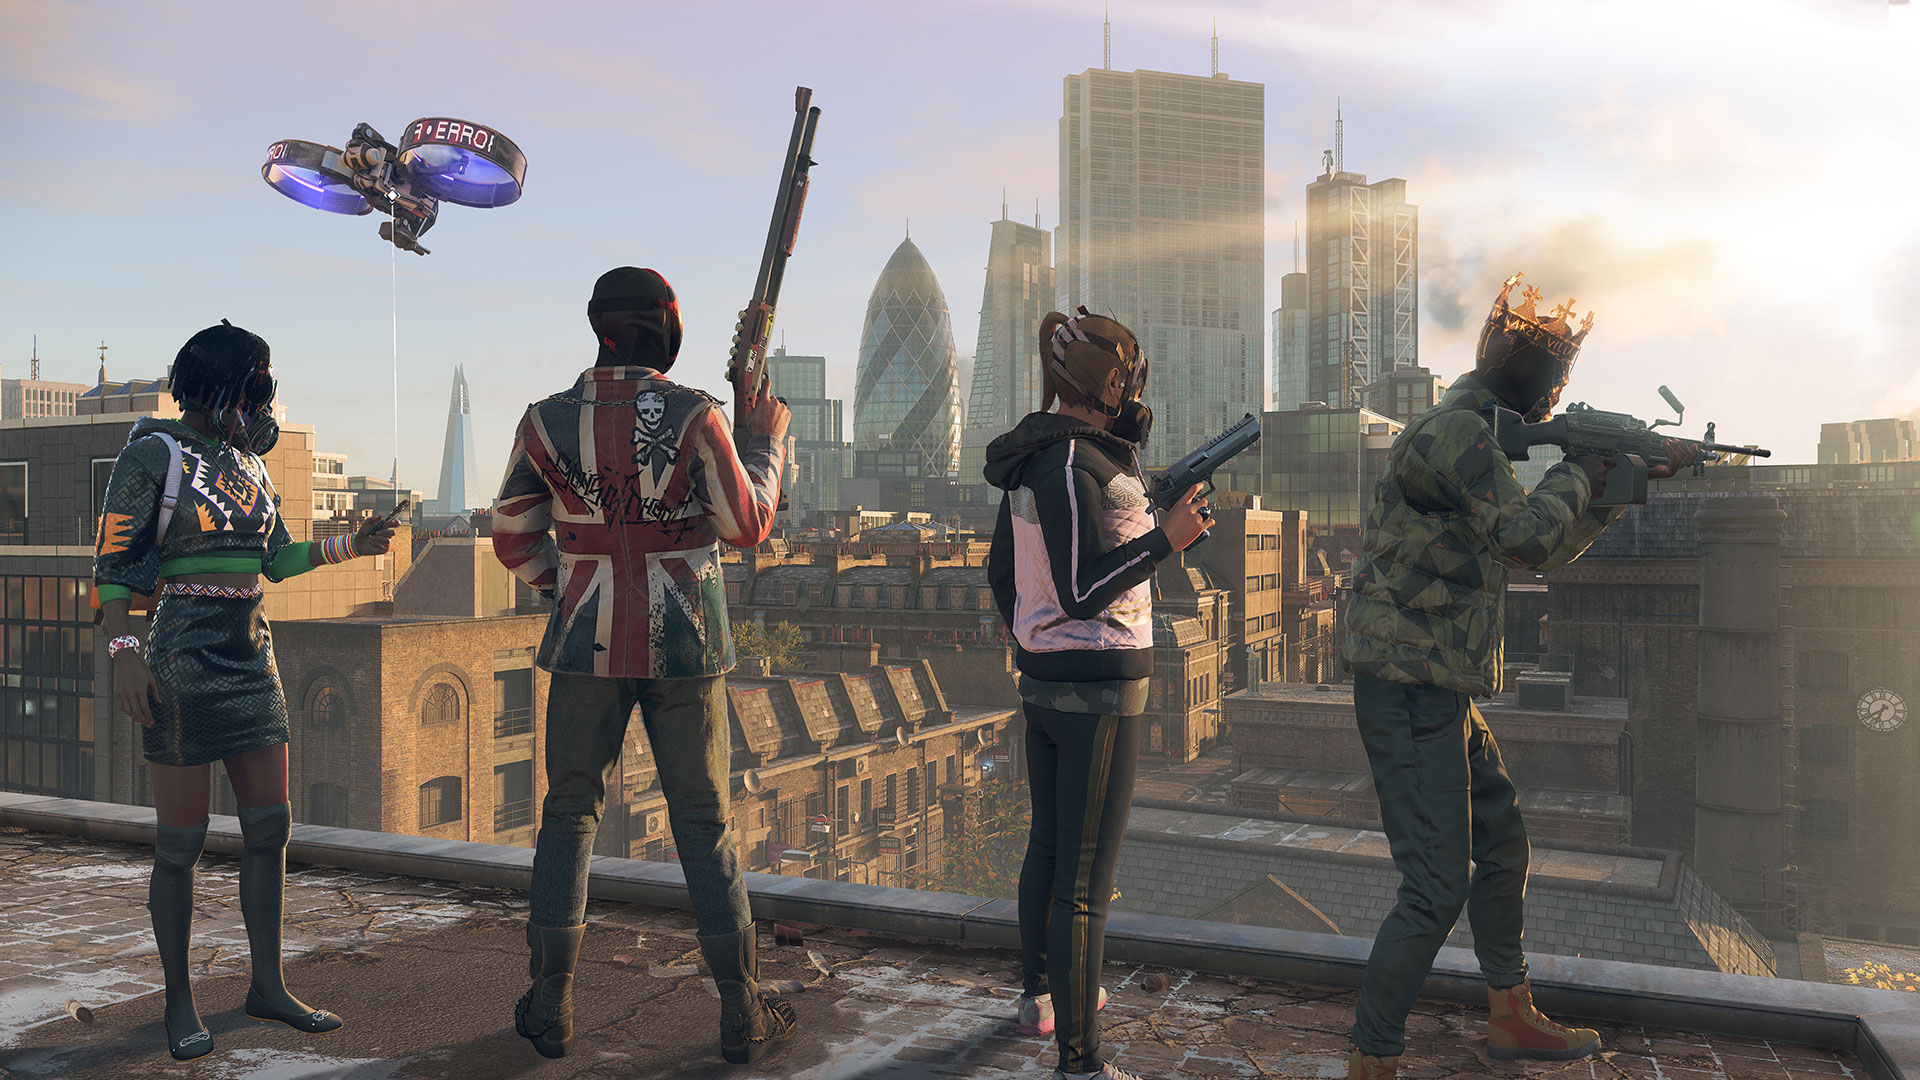 Preview: Watch Dogs Legion - Pigs Can Fly (They Can Hack, Too)